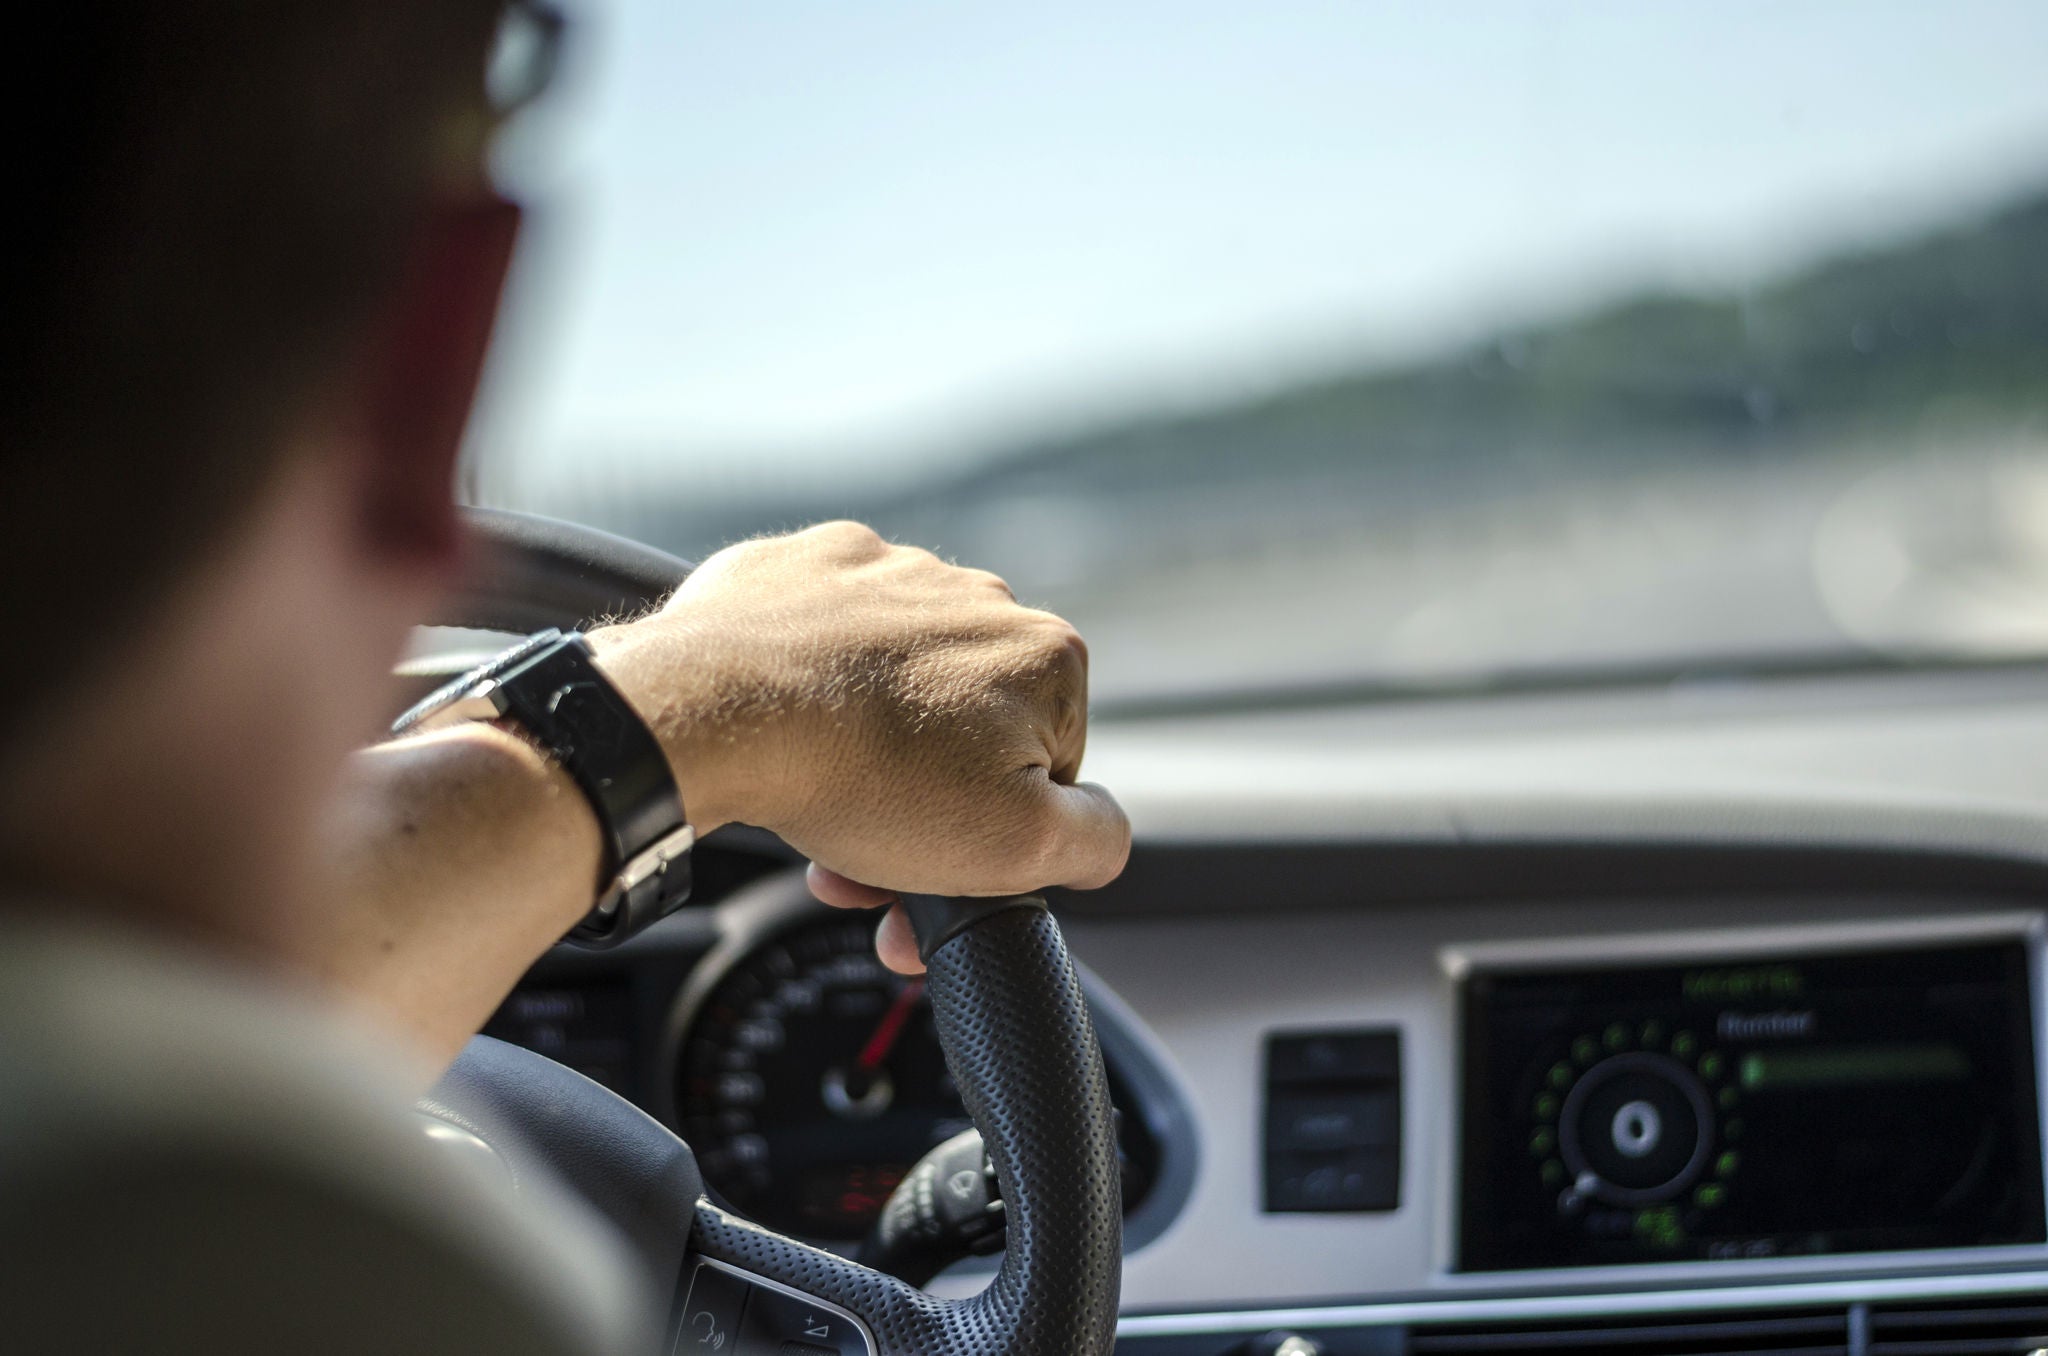 Generic photo of man driving a car through slight turn.; Shutterstock ID 152454830; purchase_order: -; job: -; client: -; other: -